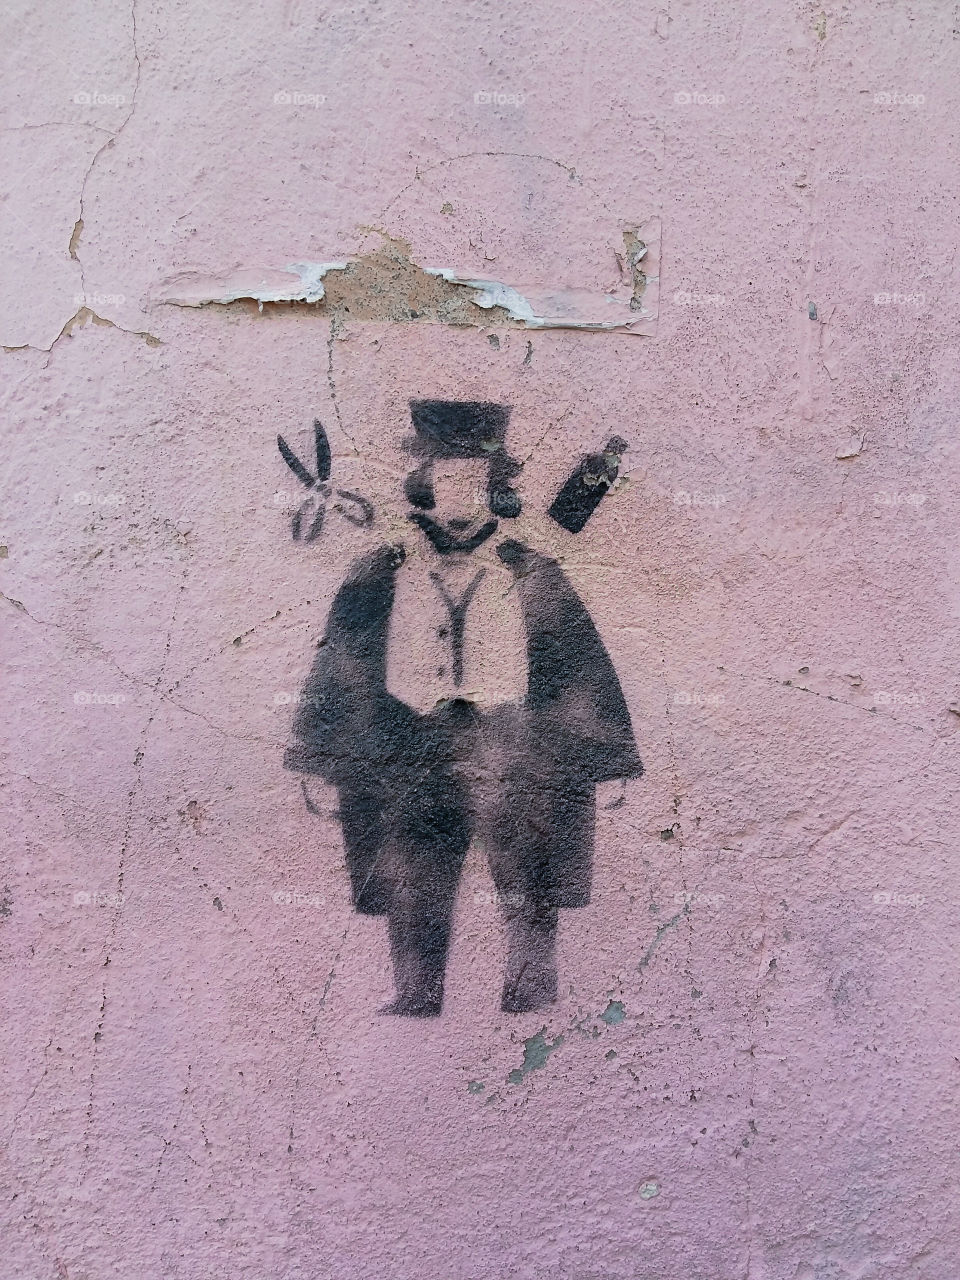 graffiti on the wall a man in a hat near the barber's scissors and spray